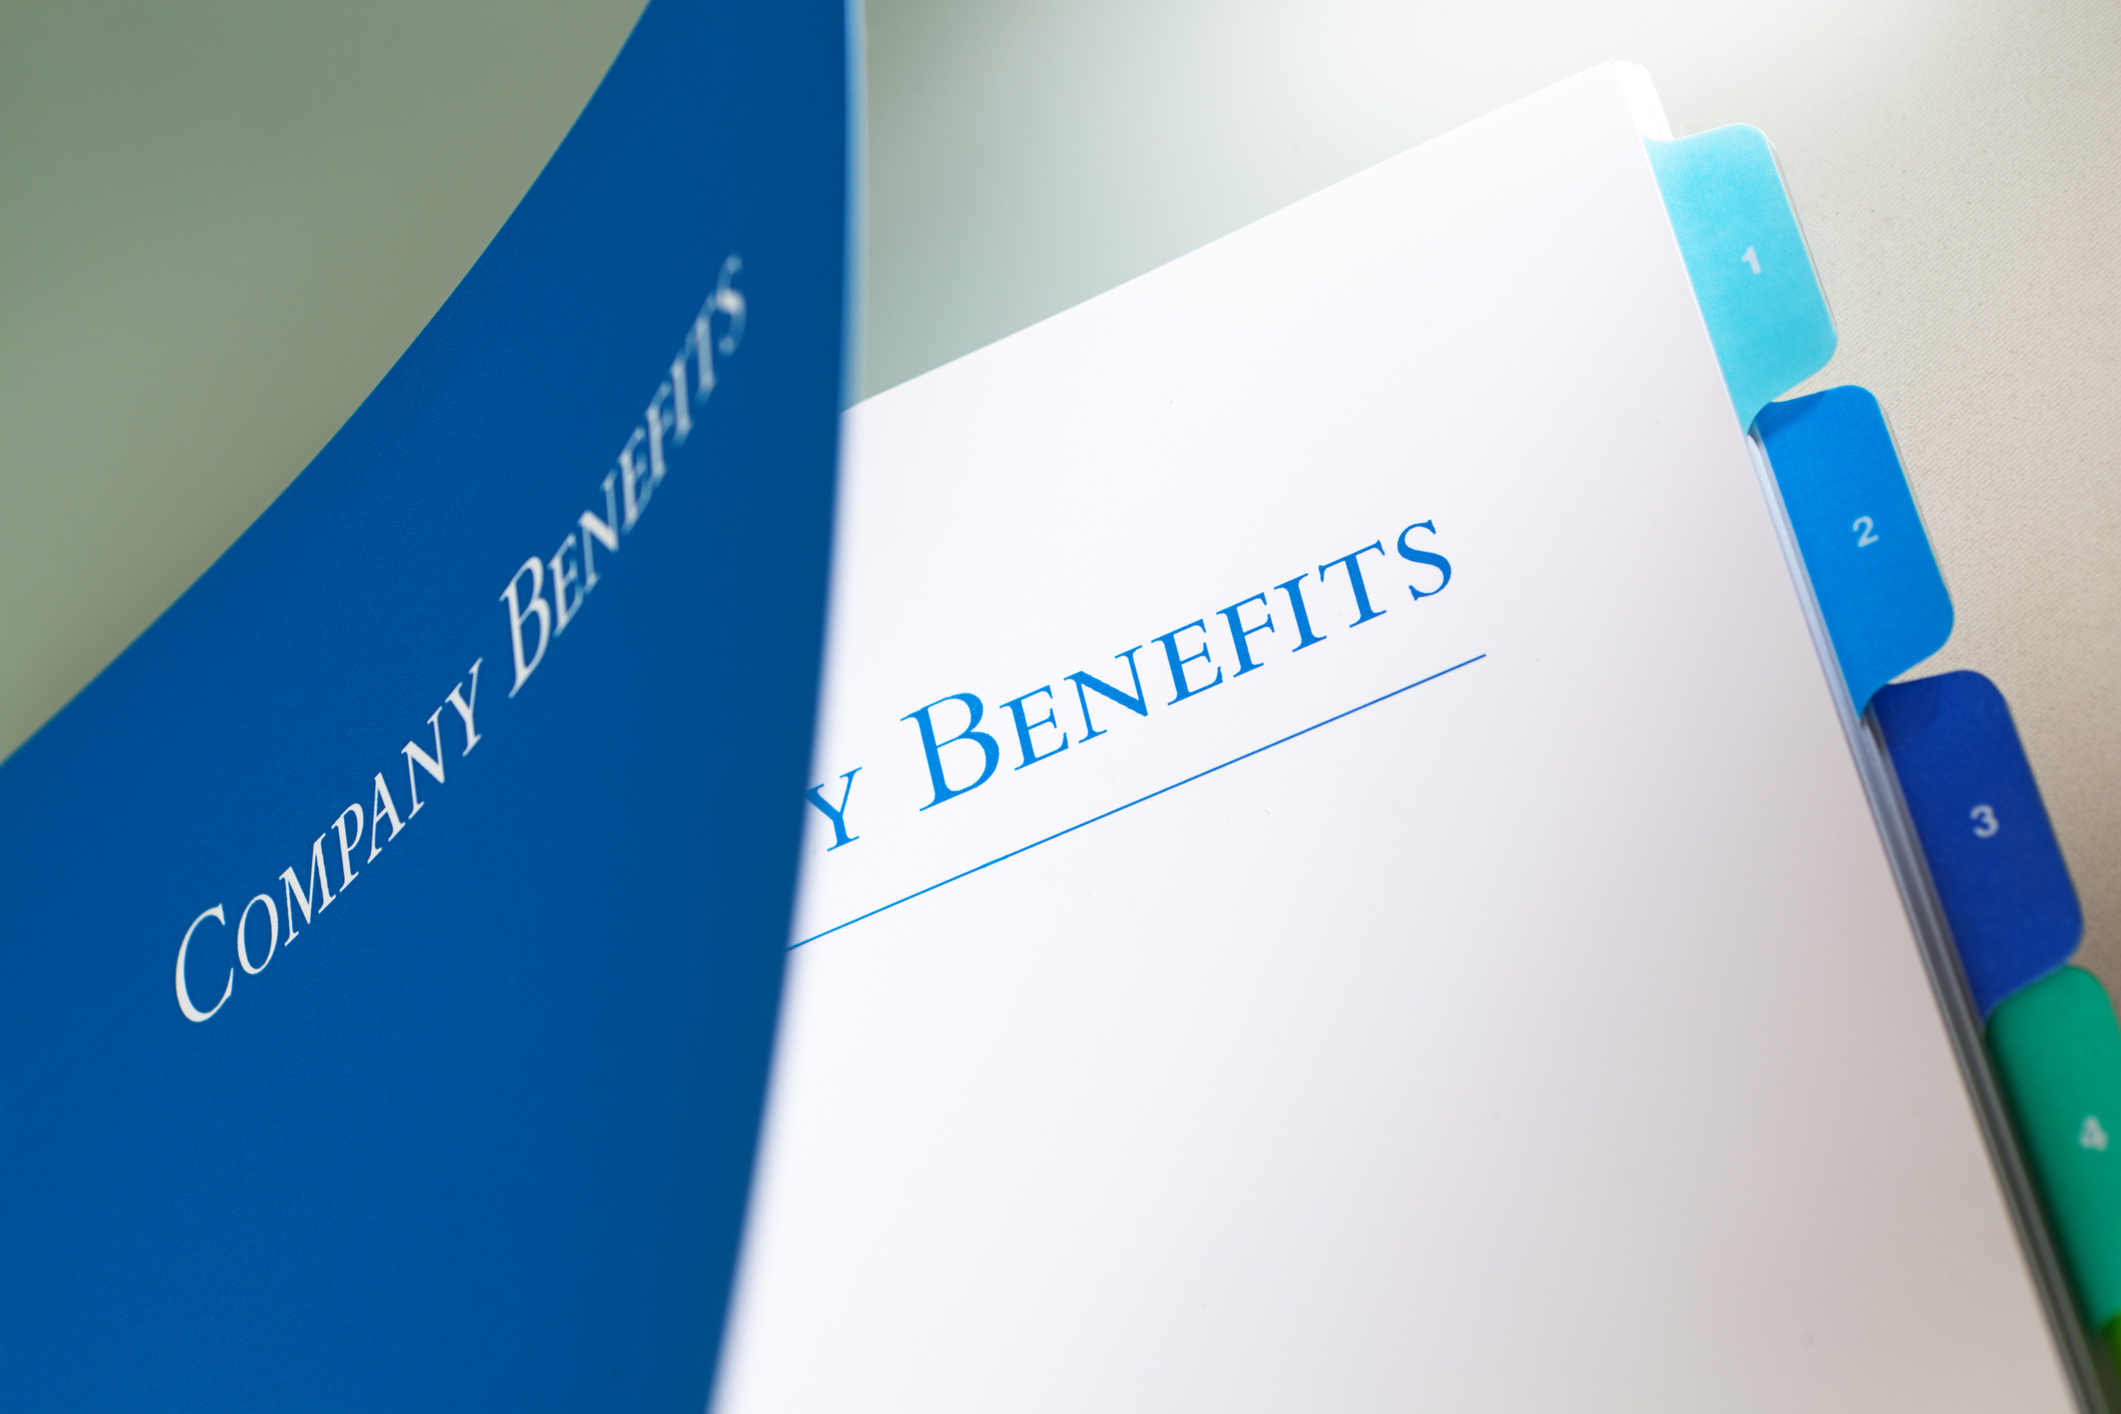 An employee benefit package manual